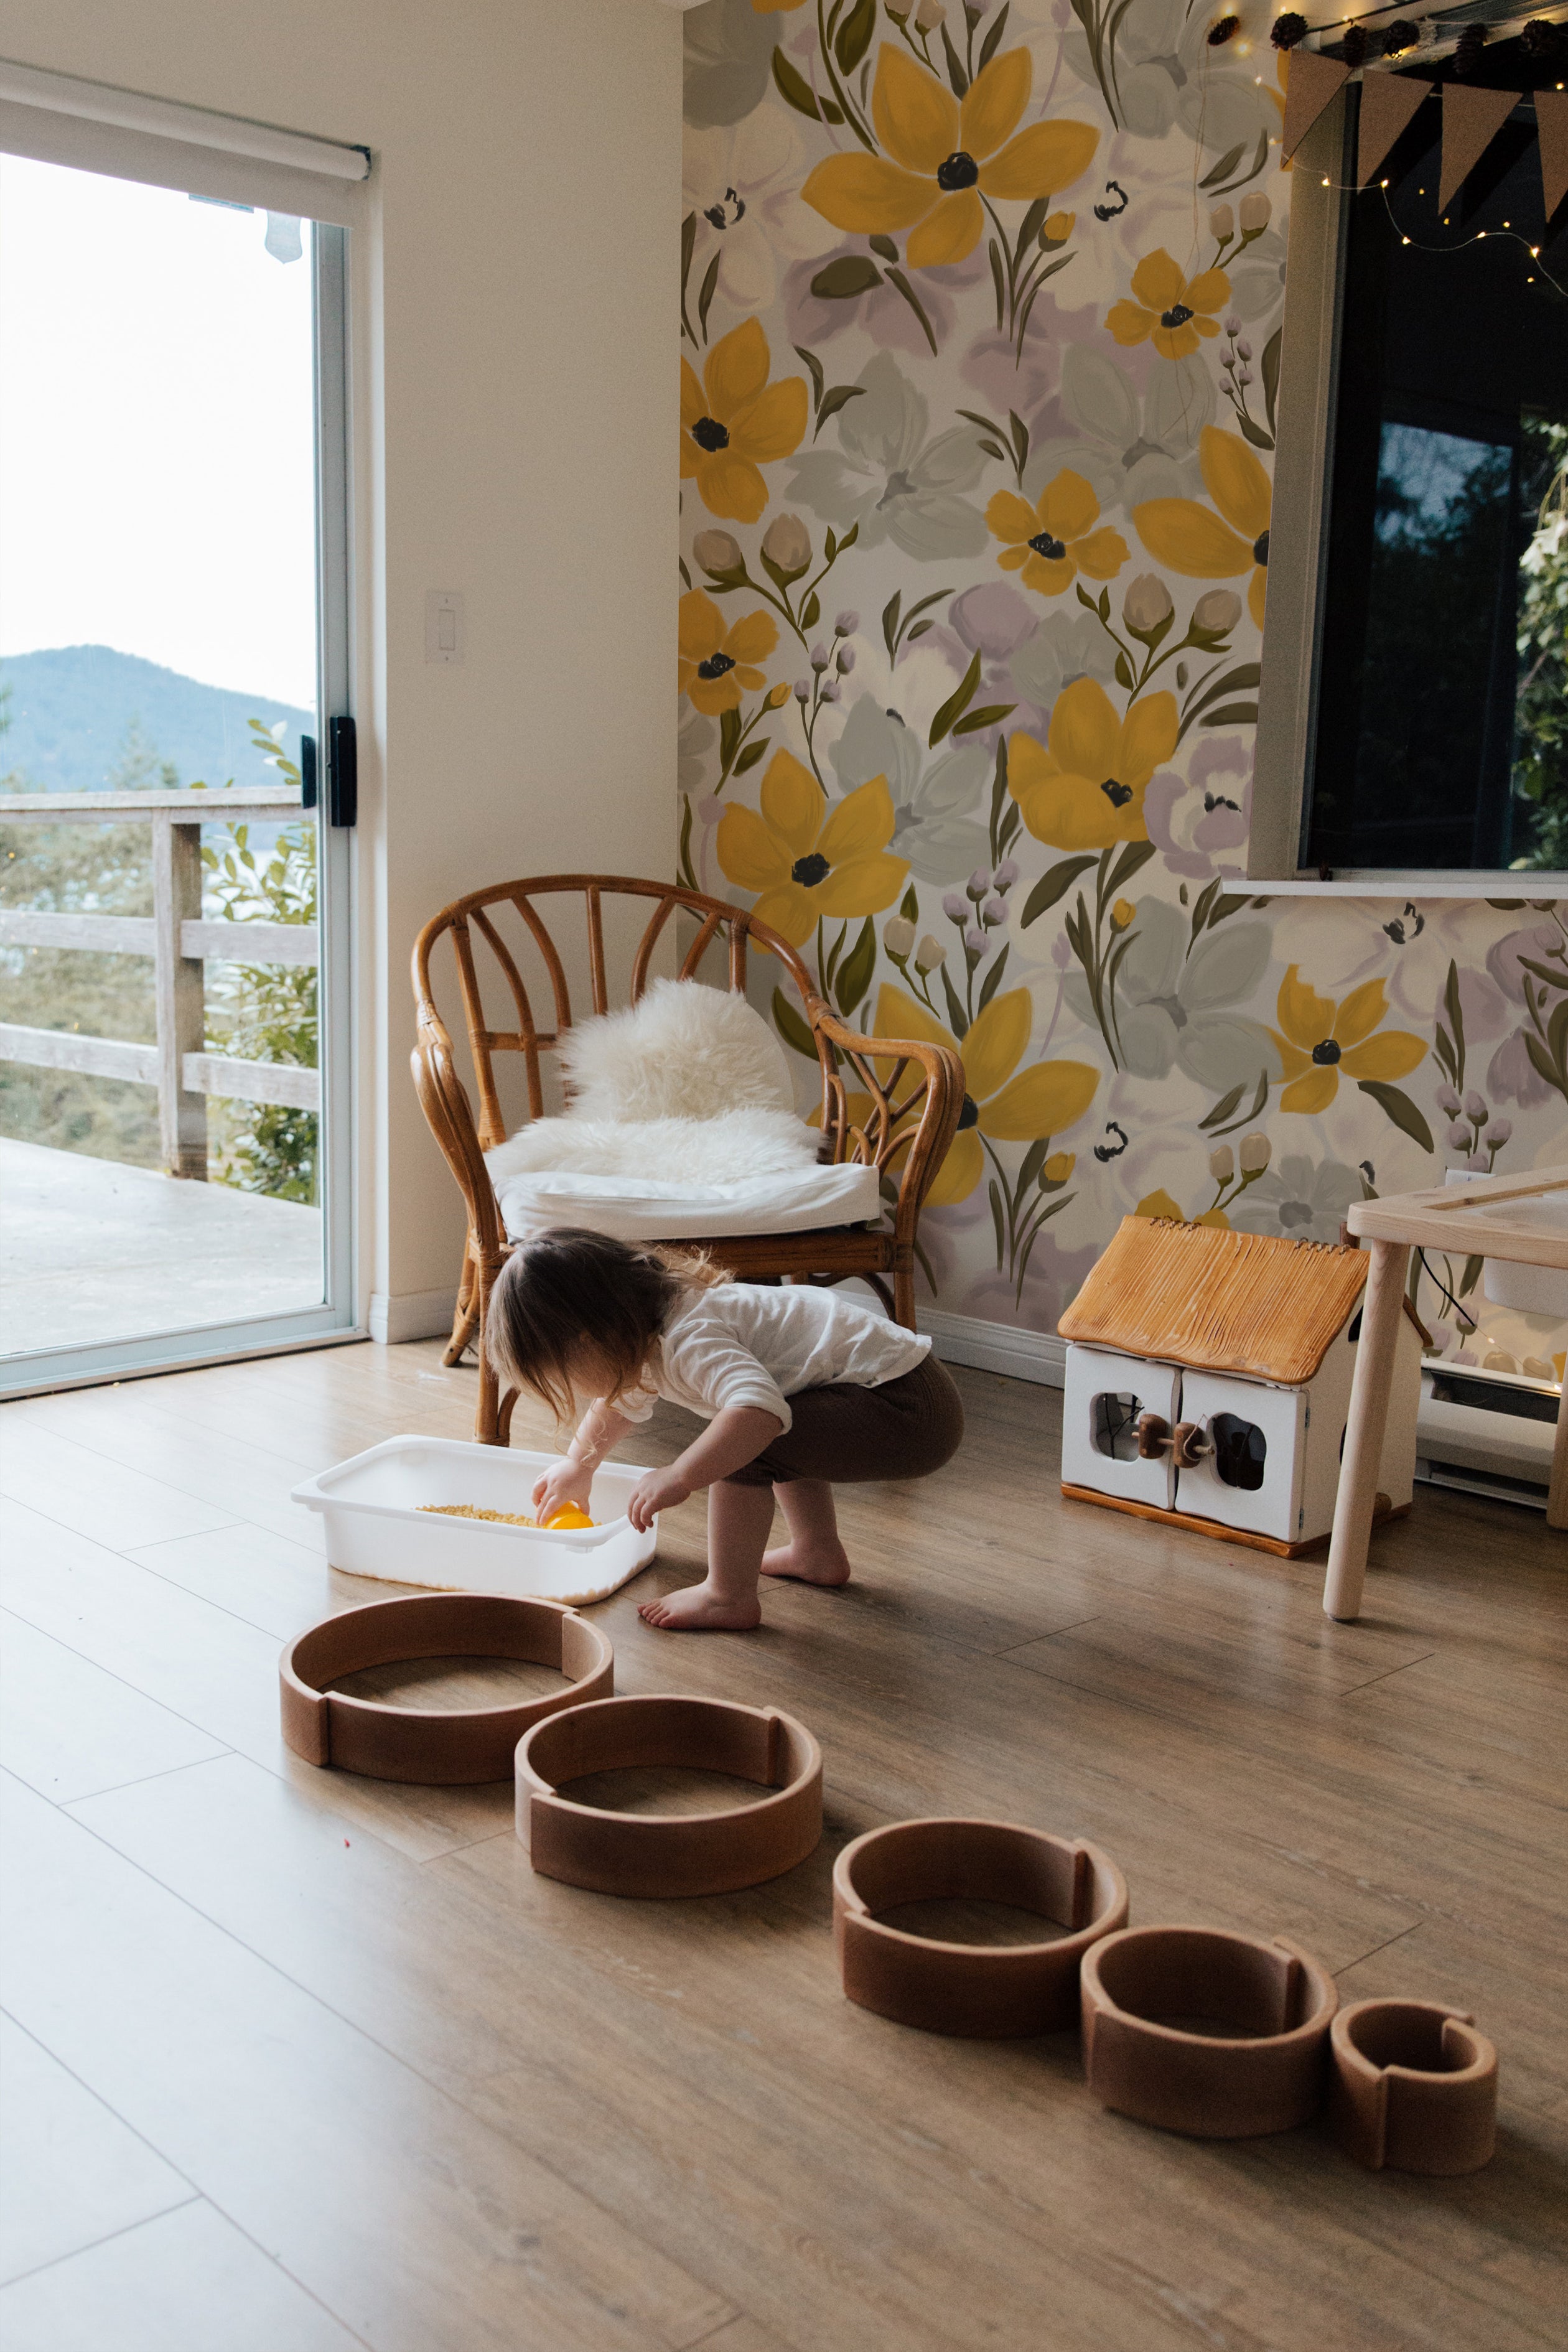 A child's play area with the Yellow Fleur Wallpaper - 75" adorning the wall, adding a cheerful burst of yellow florals to the space, complemented by natural light, wooden toys, and a rattan chair with a white cushion, creating an inviting and playful environment.